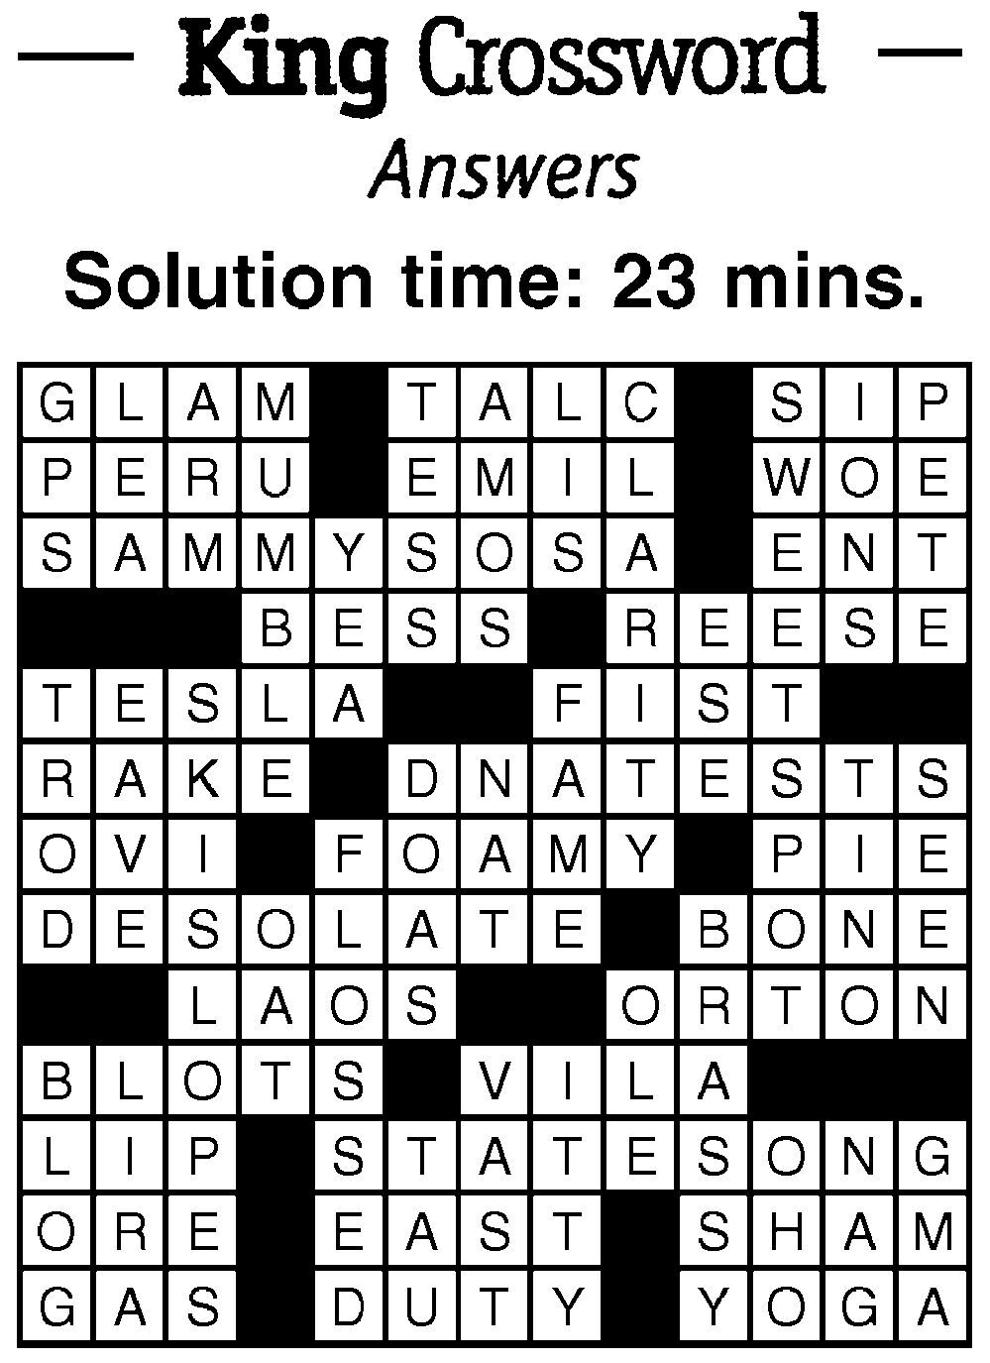 crossword-puzzle-answers-week-of-august-6-2021-crossword-fairfaxtimes